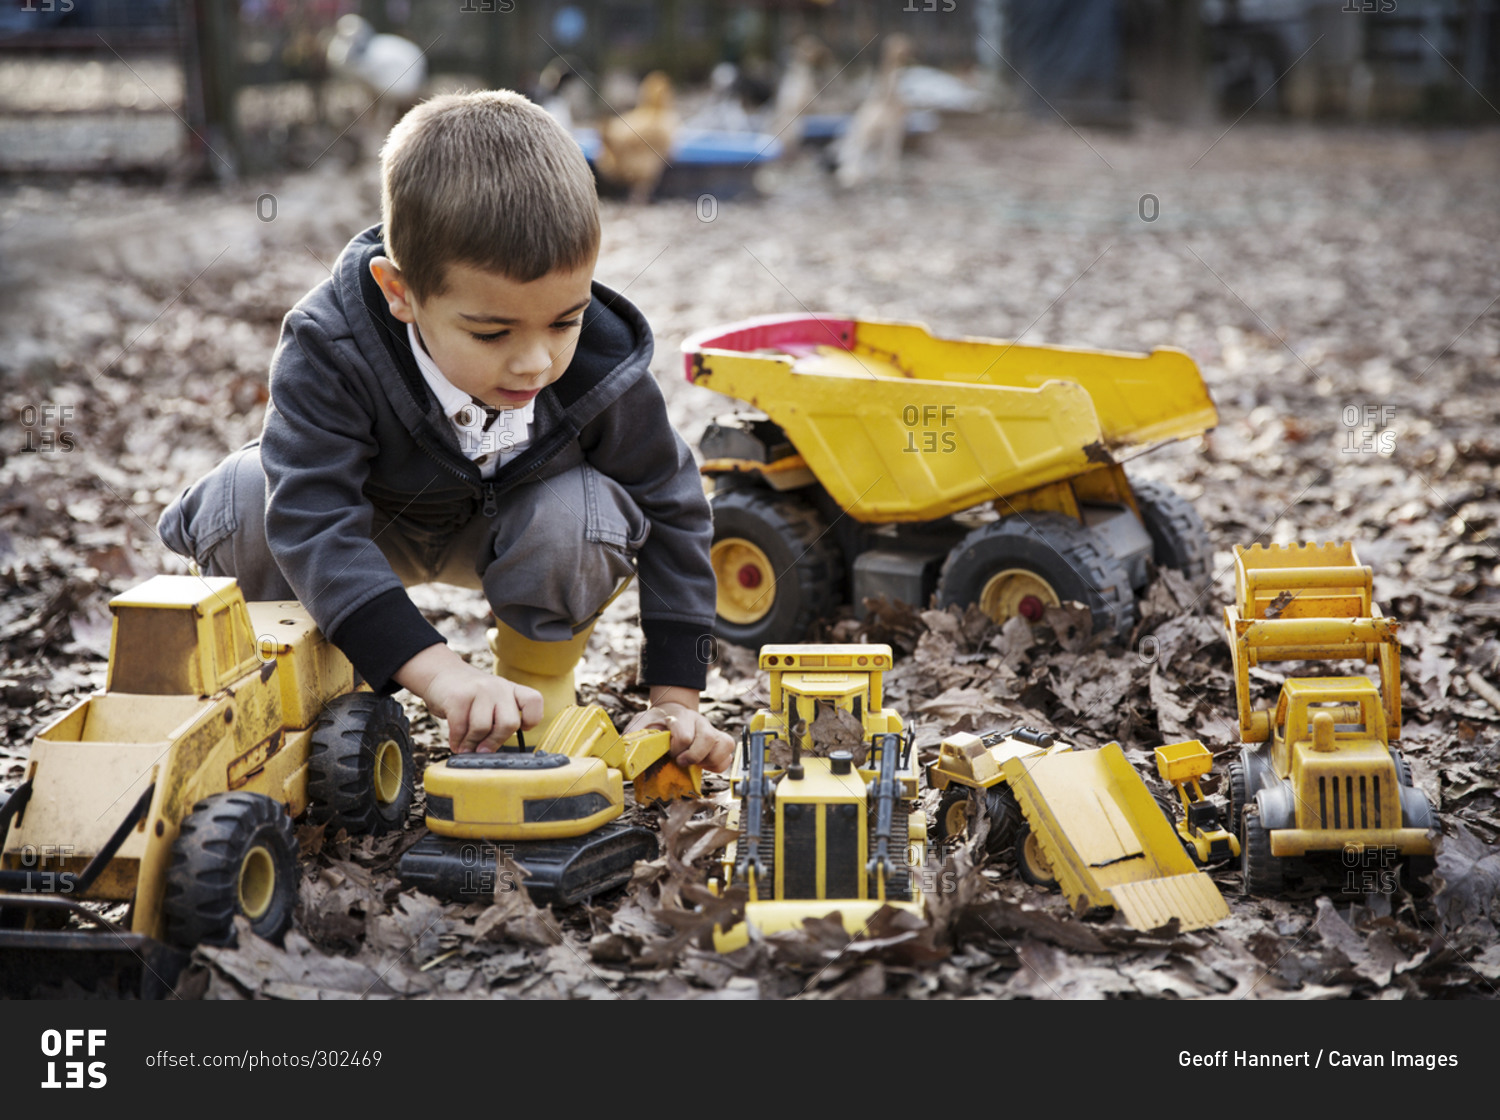 Boy playing with toy trucks in fallen leaves